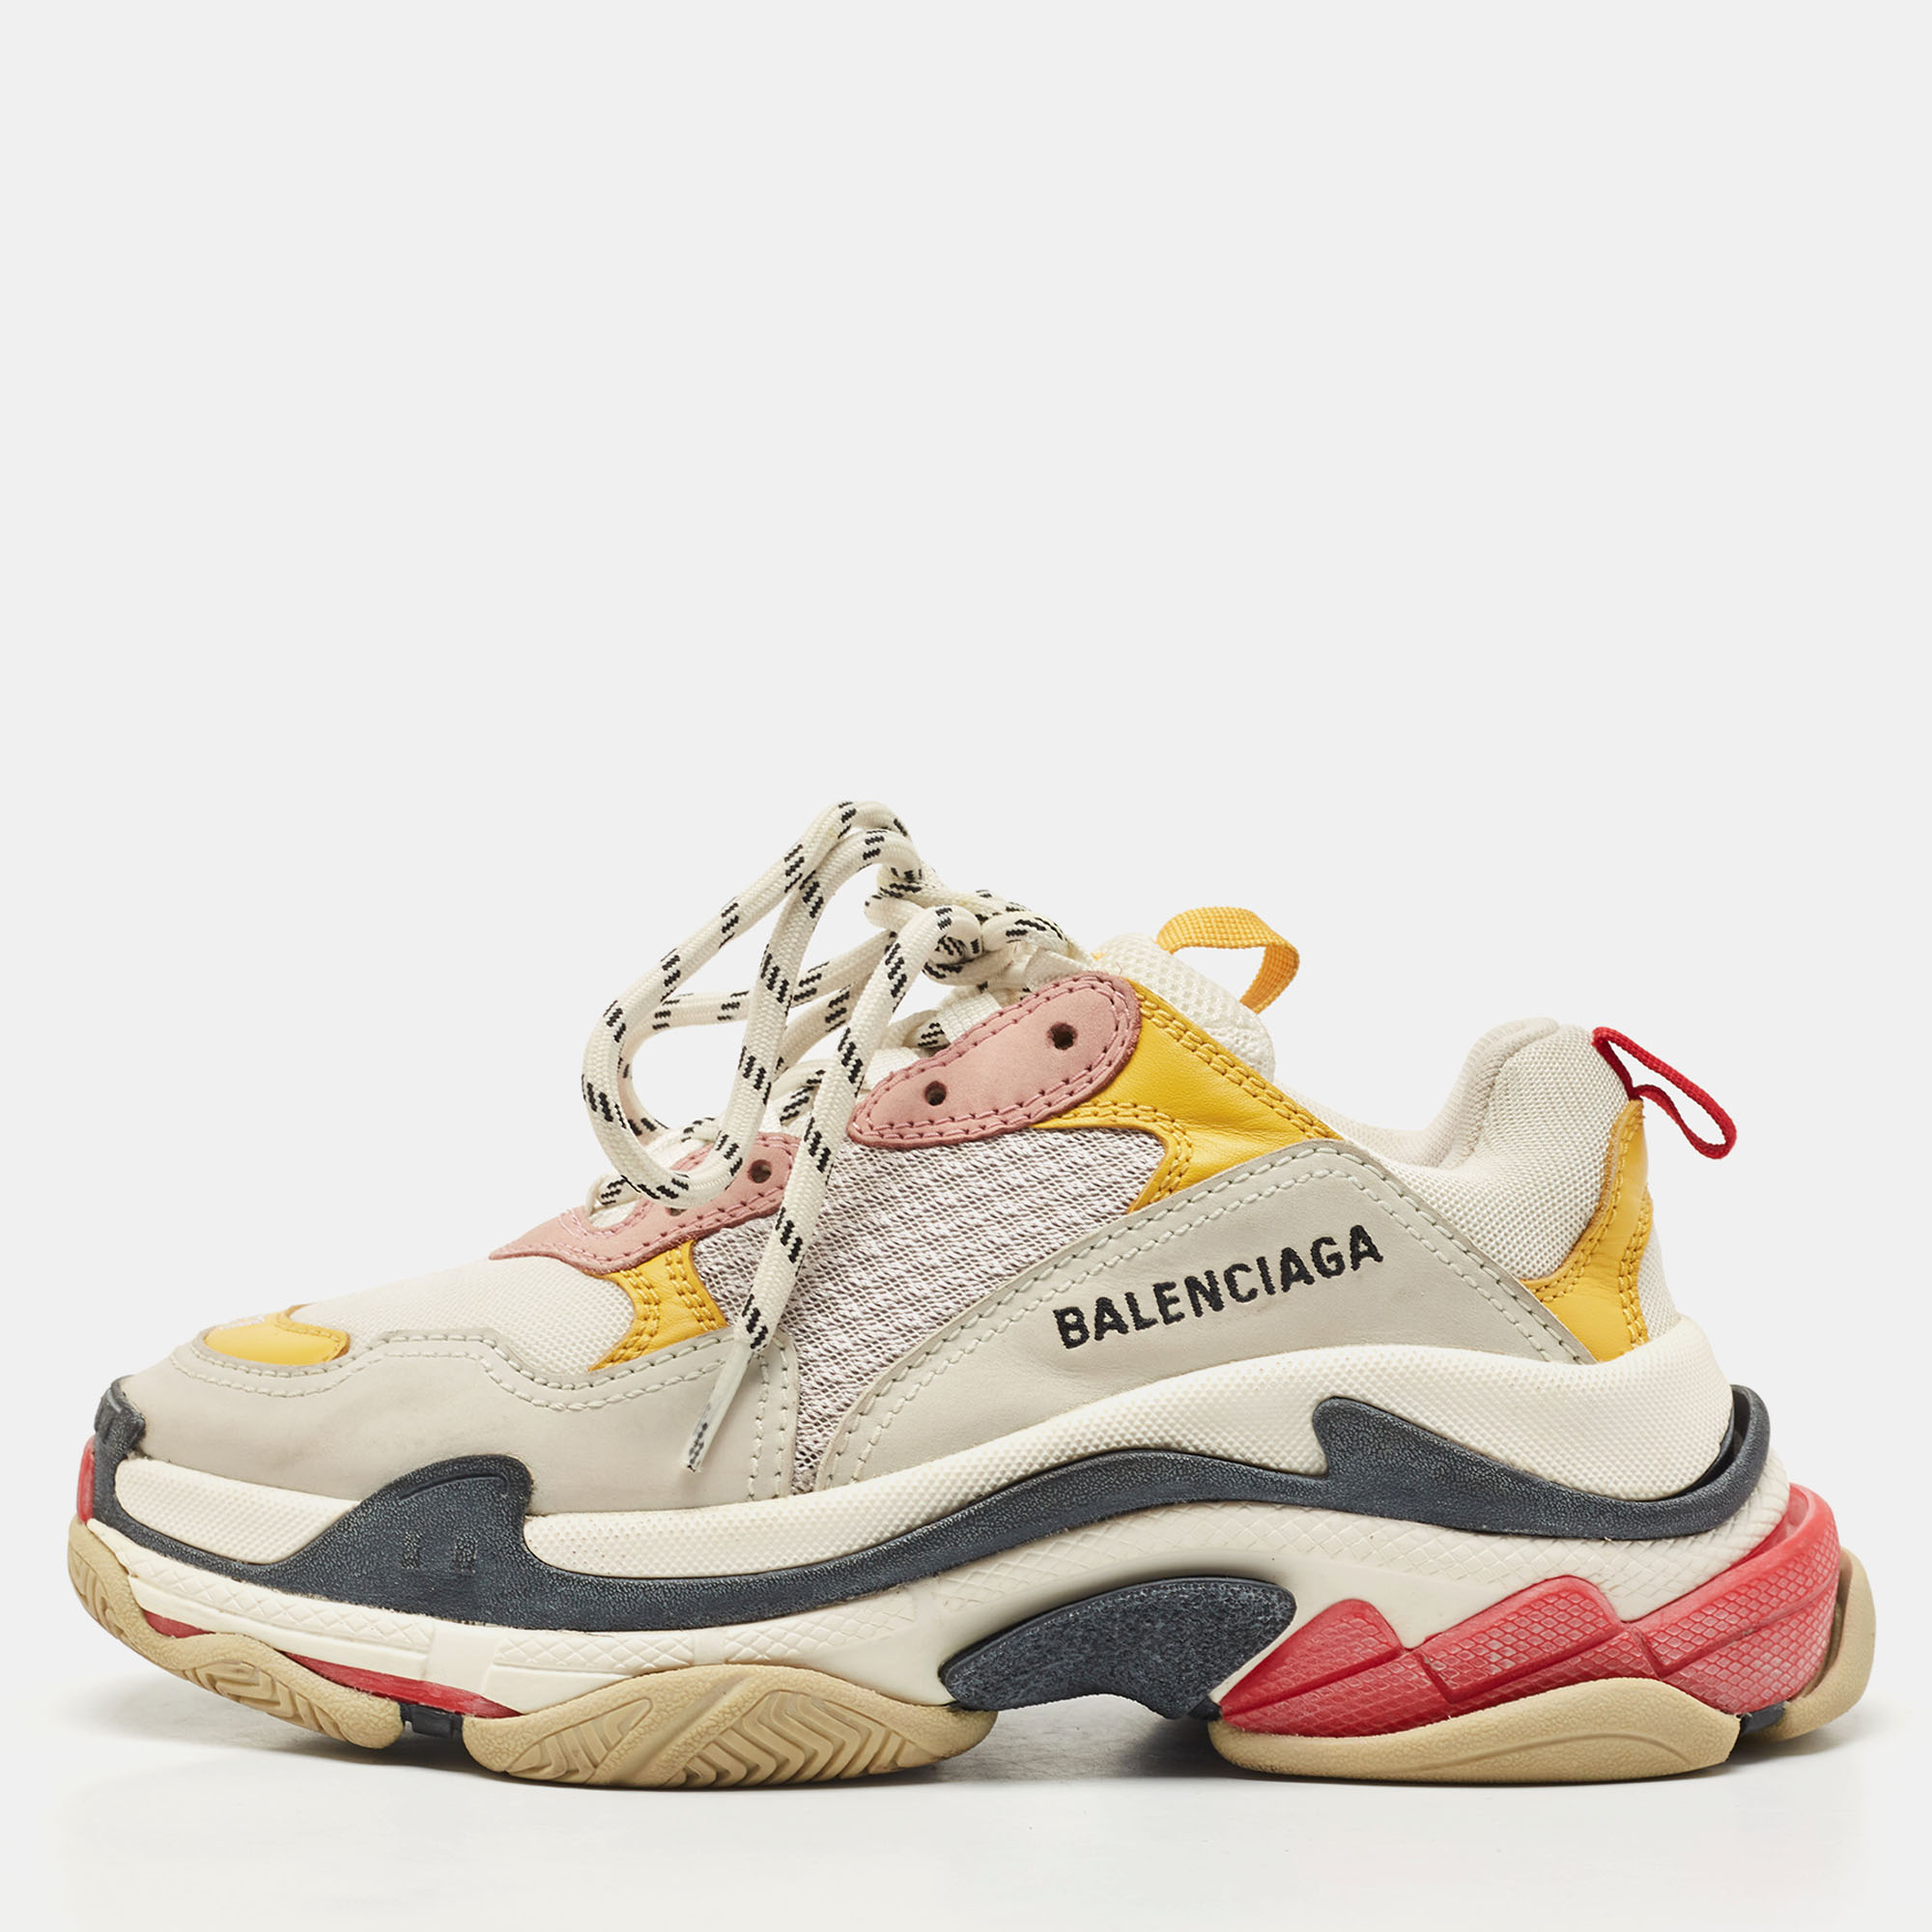 Balenciaga Tri Color Leather And Mesh Triple S Sneakers Size 37